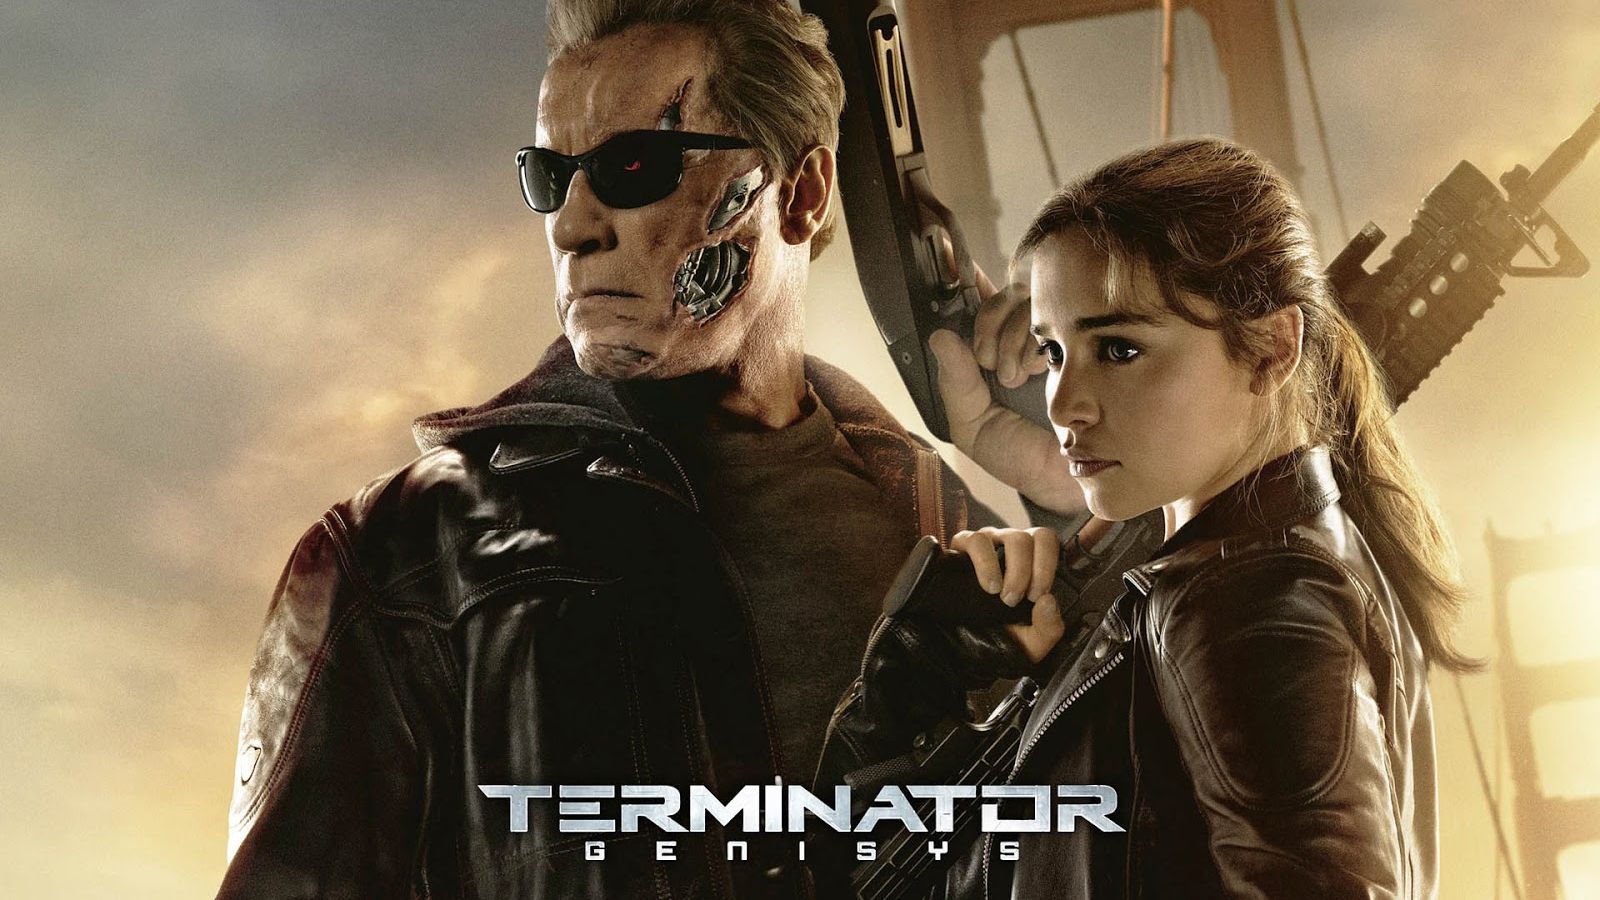 Free download Terminator Genisys wallpaper Movie HQ Terminator Genisys [1600x1000] for your Desktop, Mobile & Tablet. Explore Terminator Films Wallpaper. Terminator Films Wallpaper, Terminator Wallpaper, Terminator Background